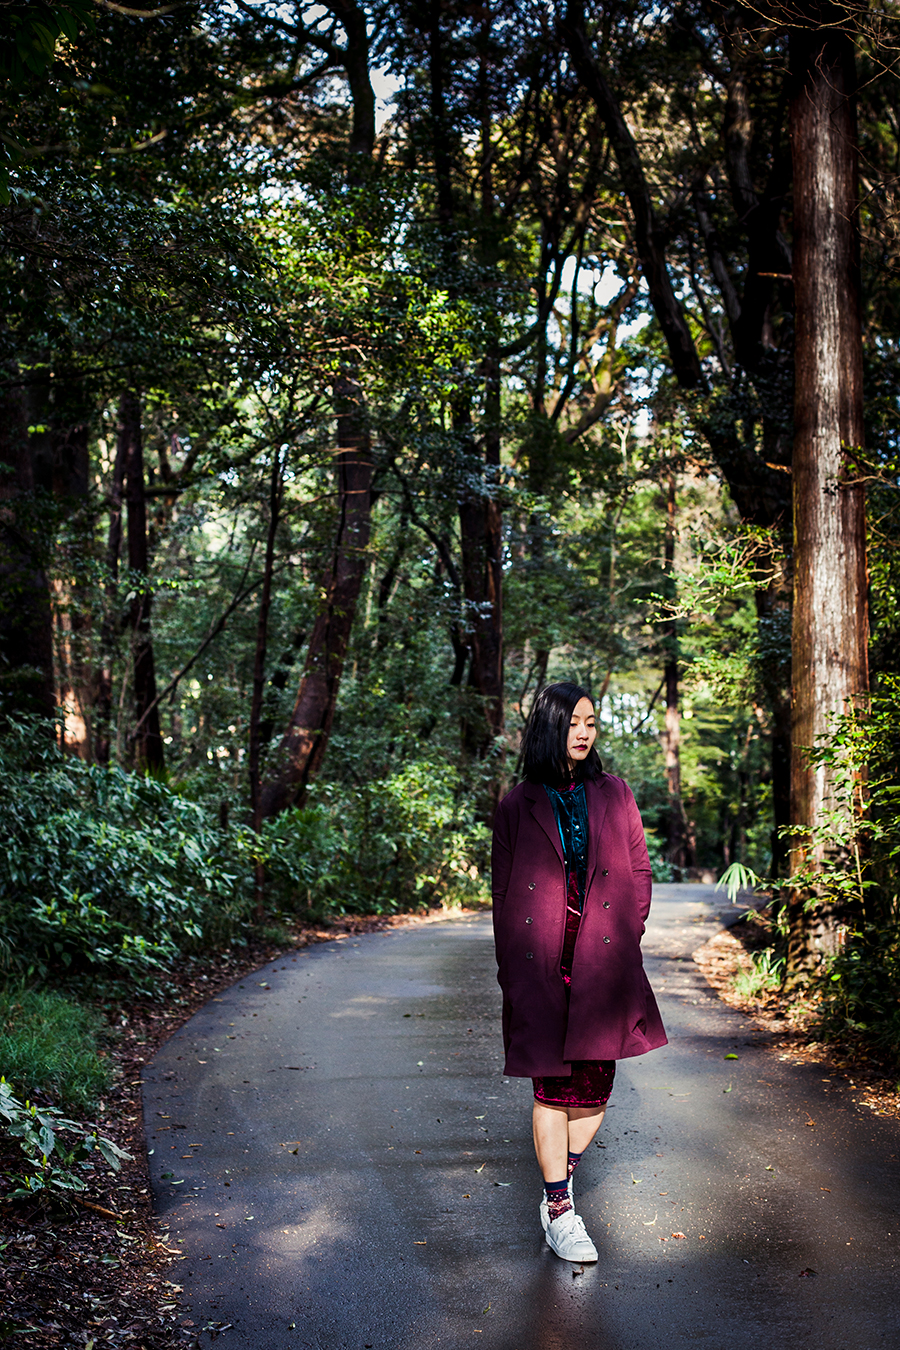 Meiji forest outfit: Shein crushed velvet dress, Zaful gold lace choker, vintage gold seashell earring, Jucy Judy maroon coat, Tutuanna owl socks, Paperplanes white sneakers.